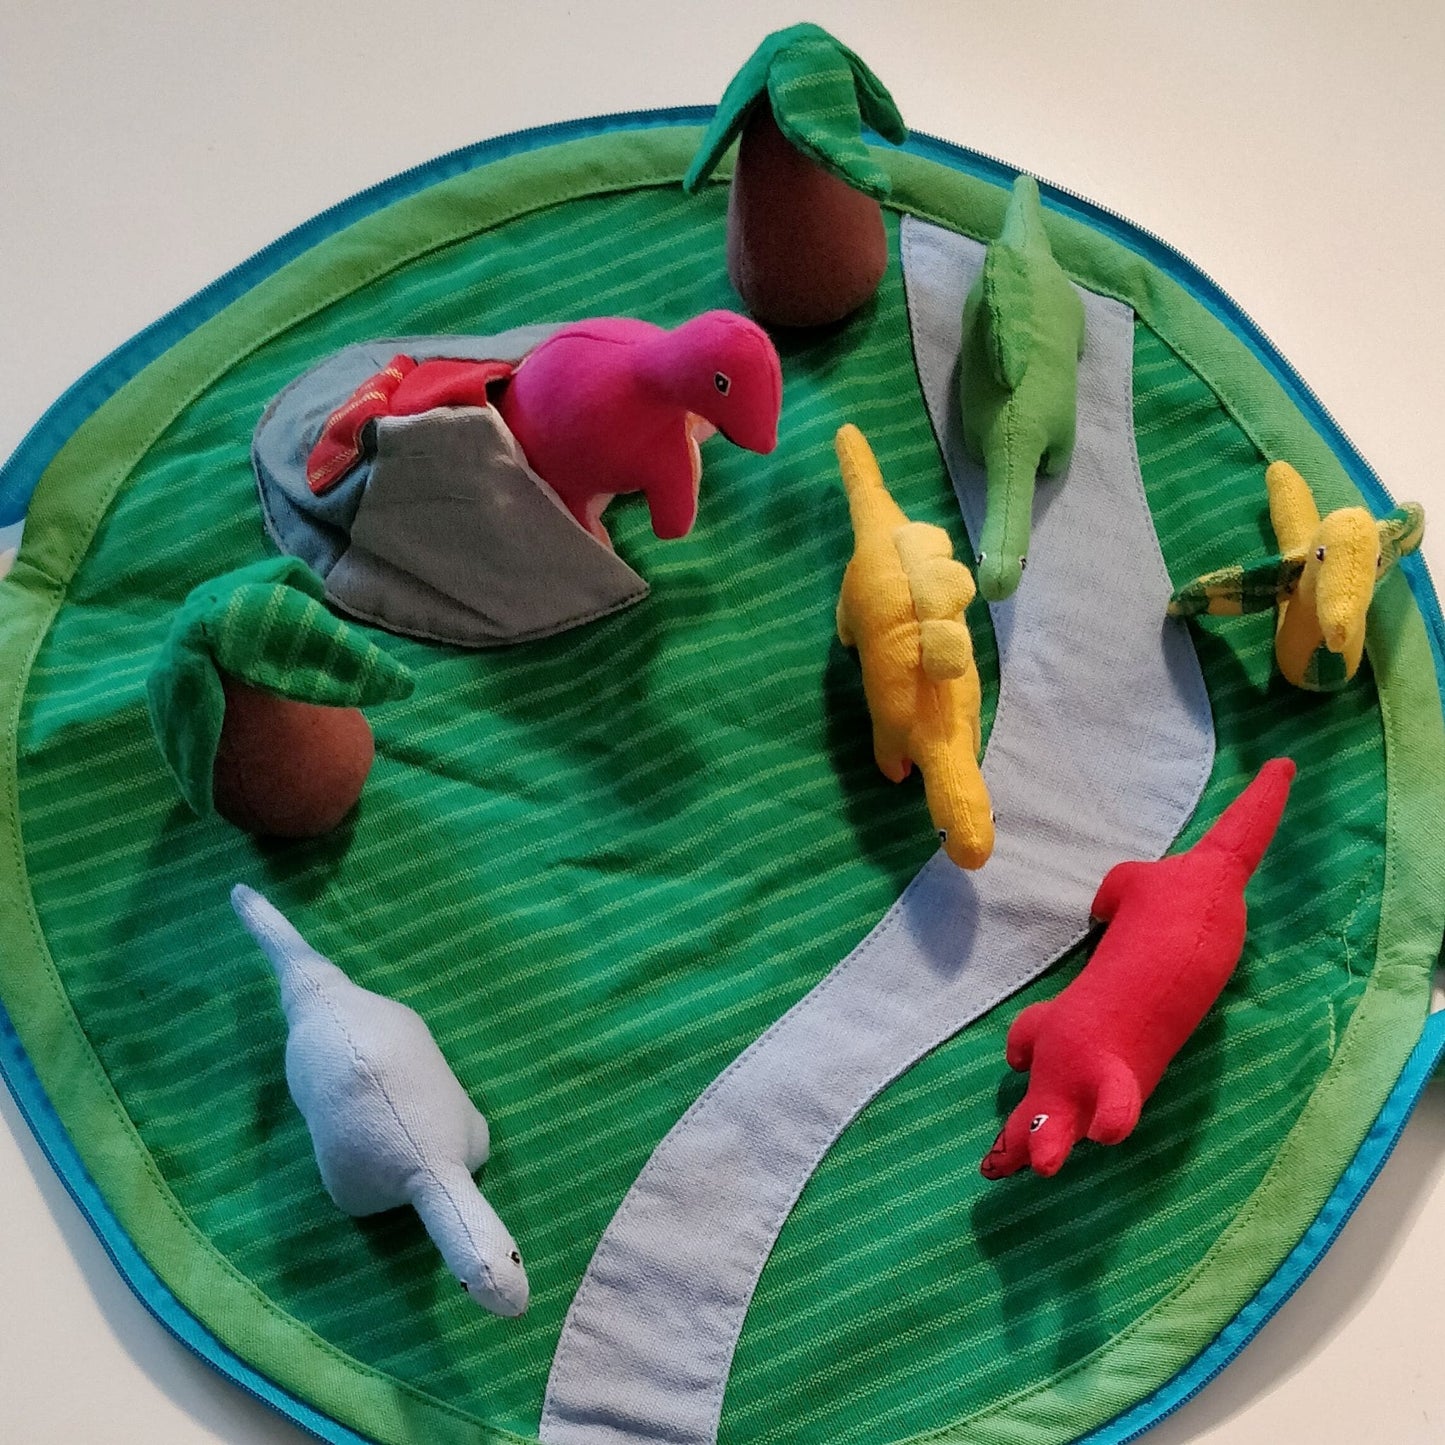 Dinosaur play set toy pouch - from above